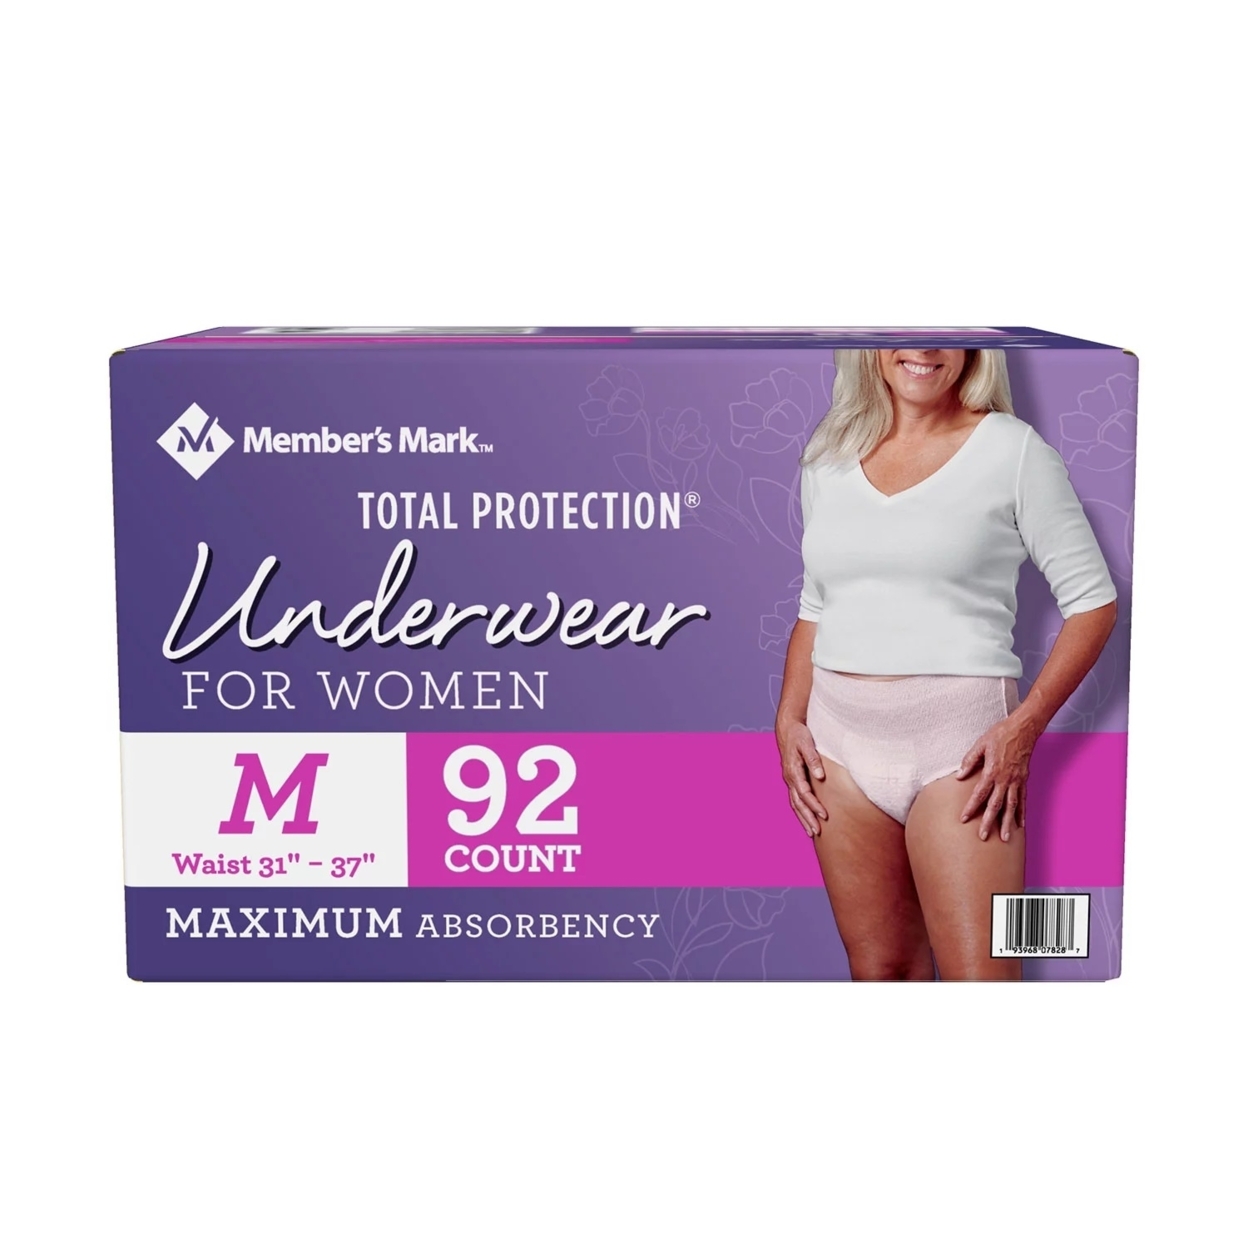 Member's Mark Total Protection Underwear For Women, Medium (92 Count)